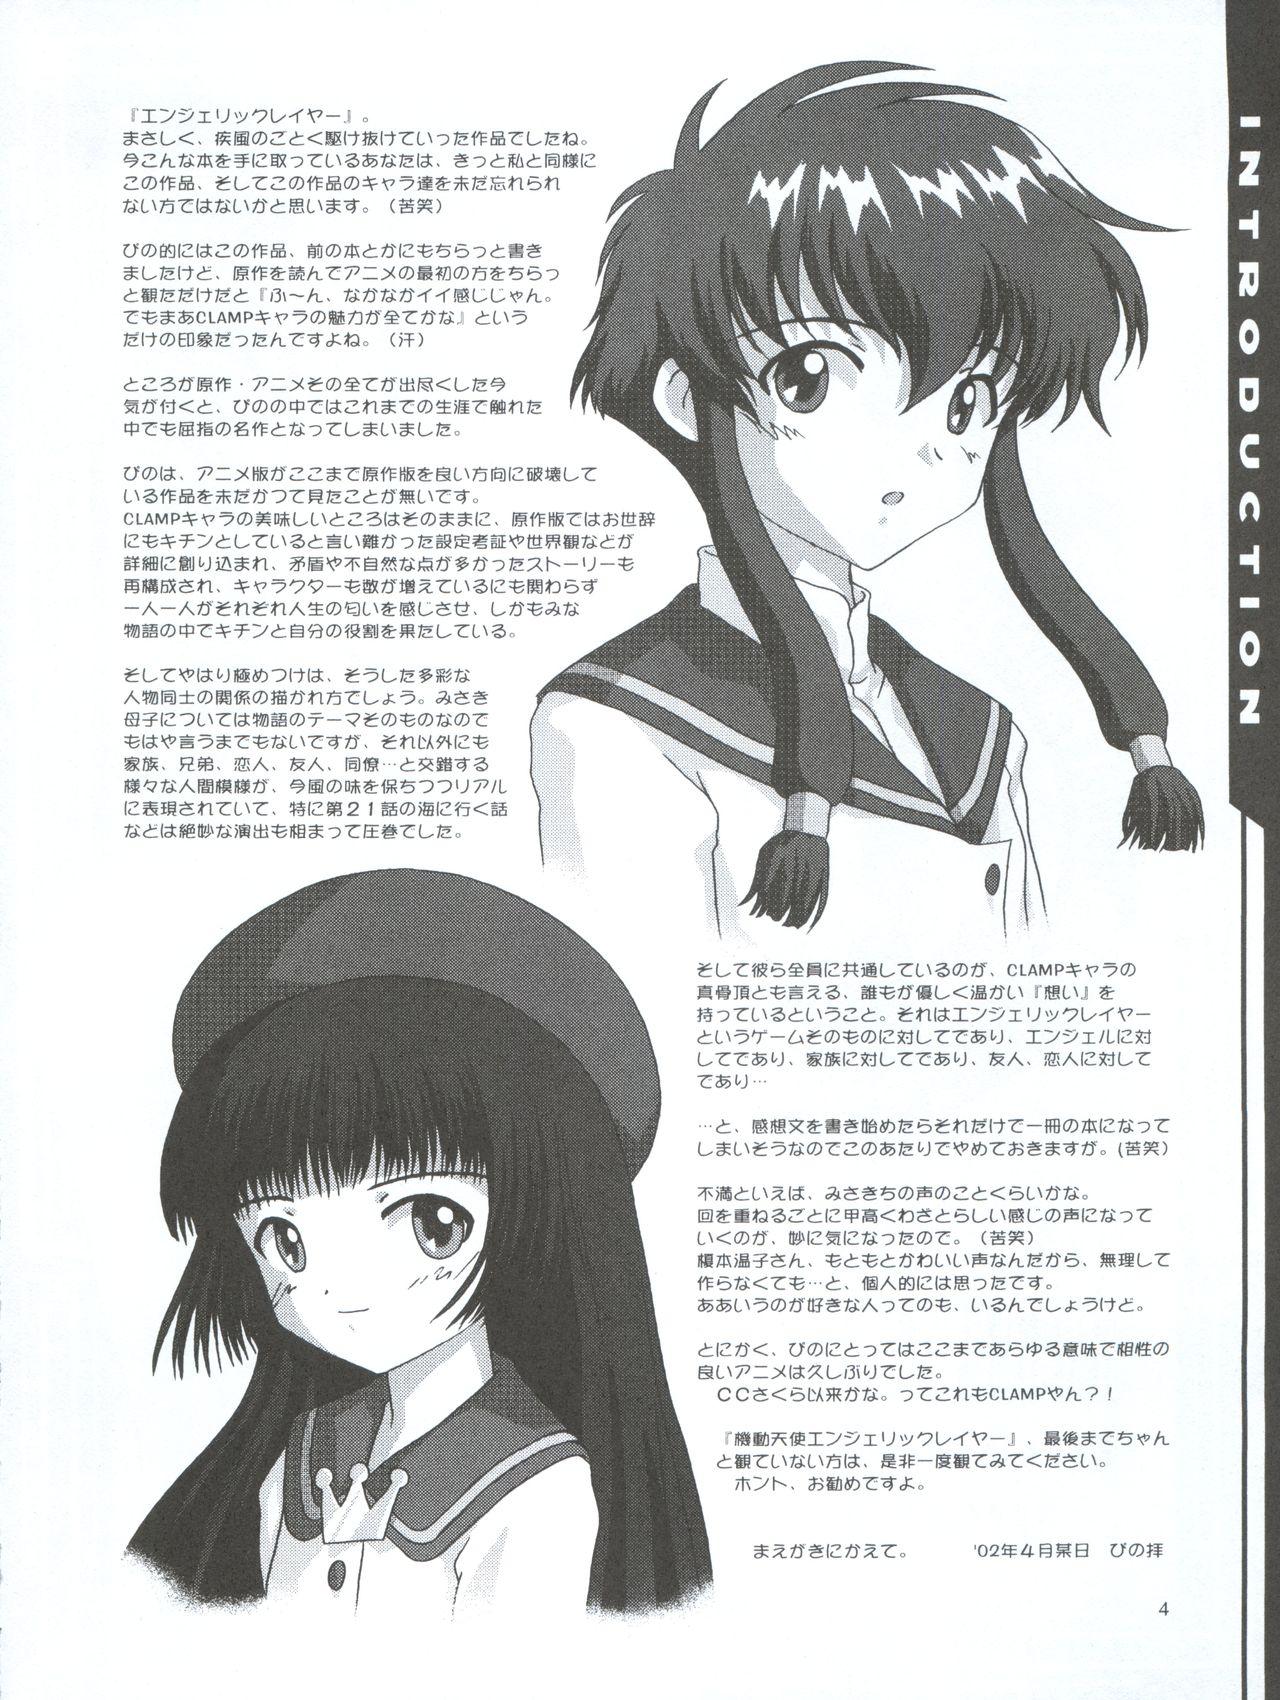 Deep Angelic Desire - Angelic layer 18yearsold - Page 4